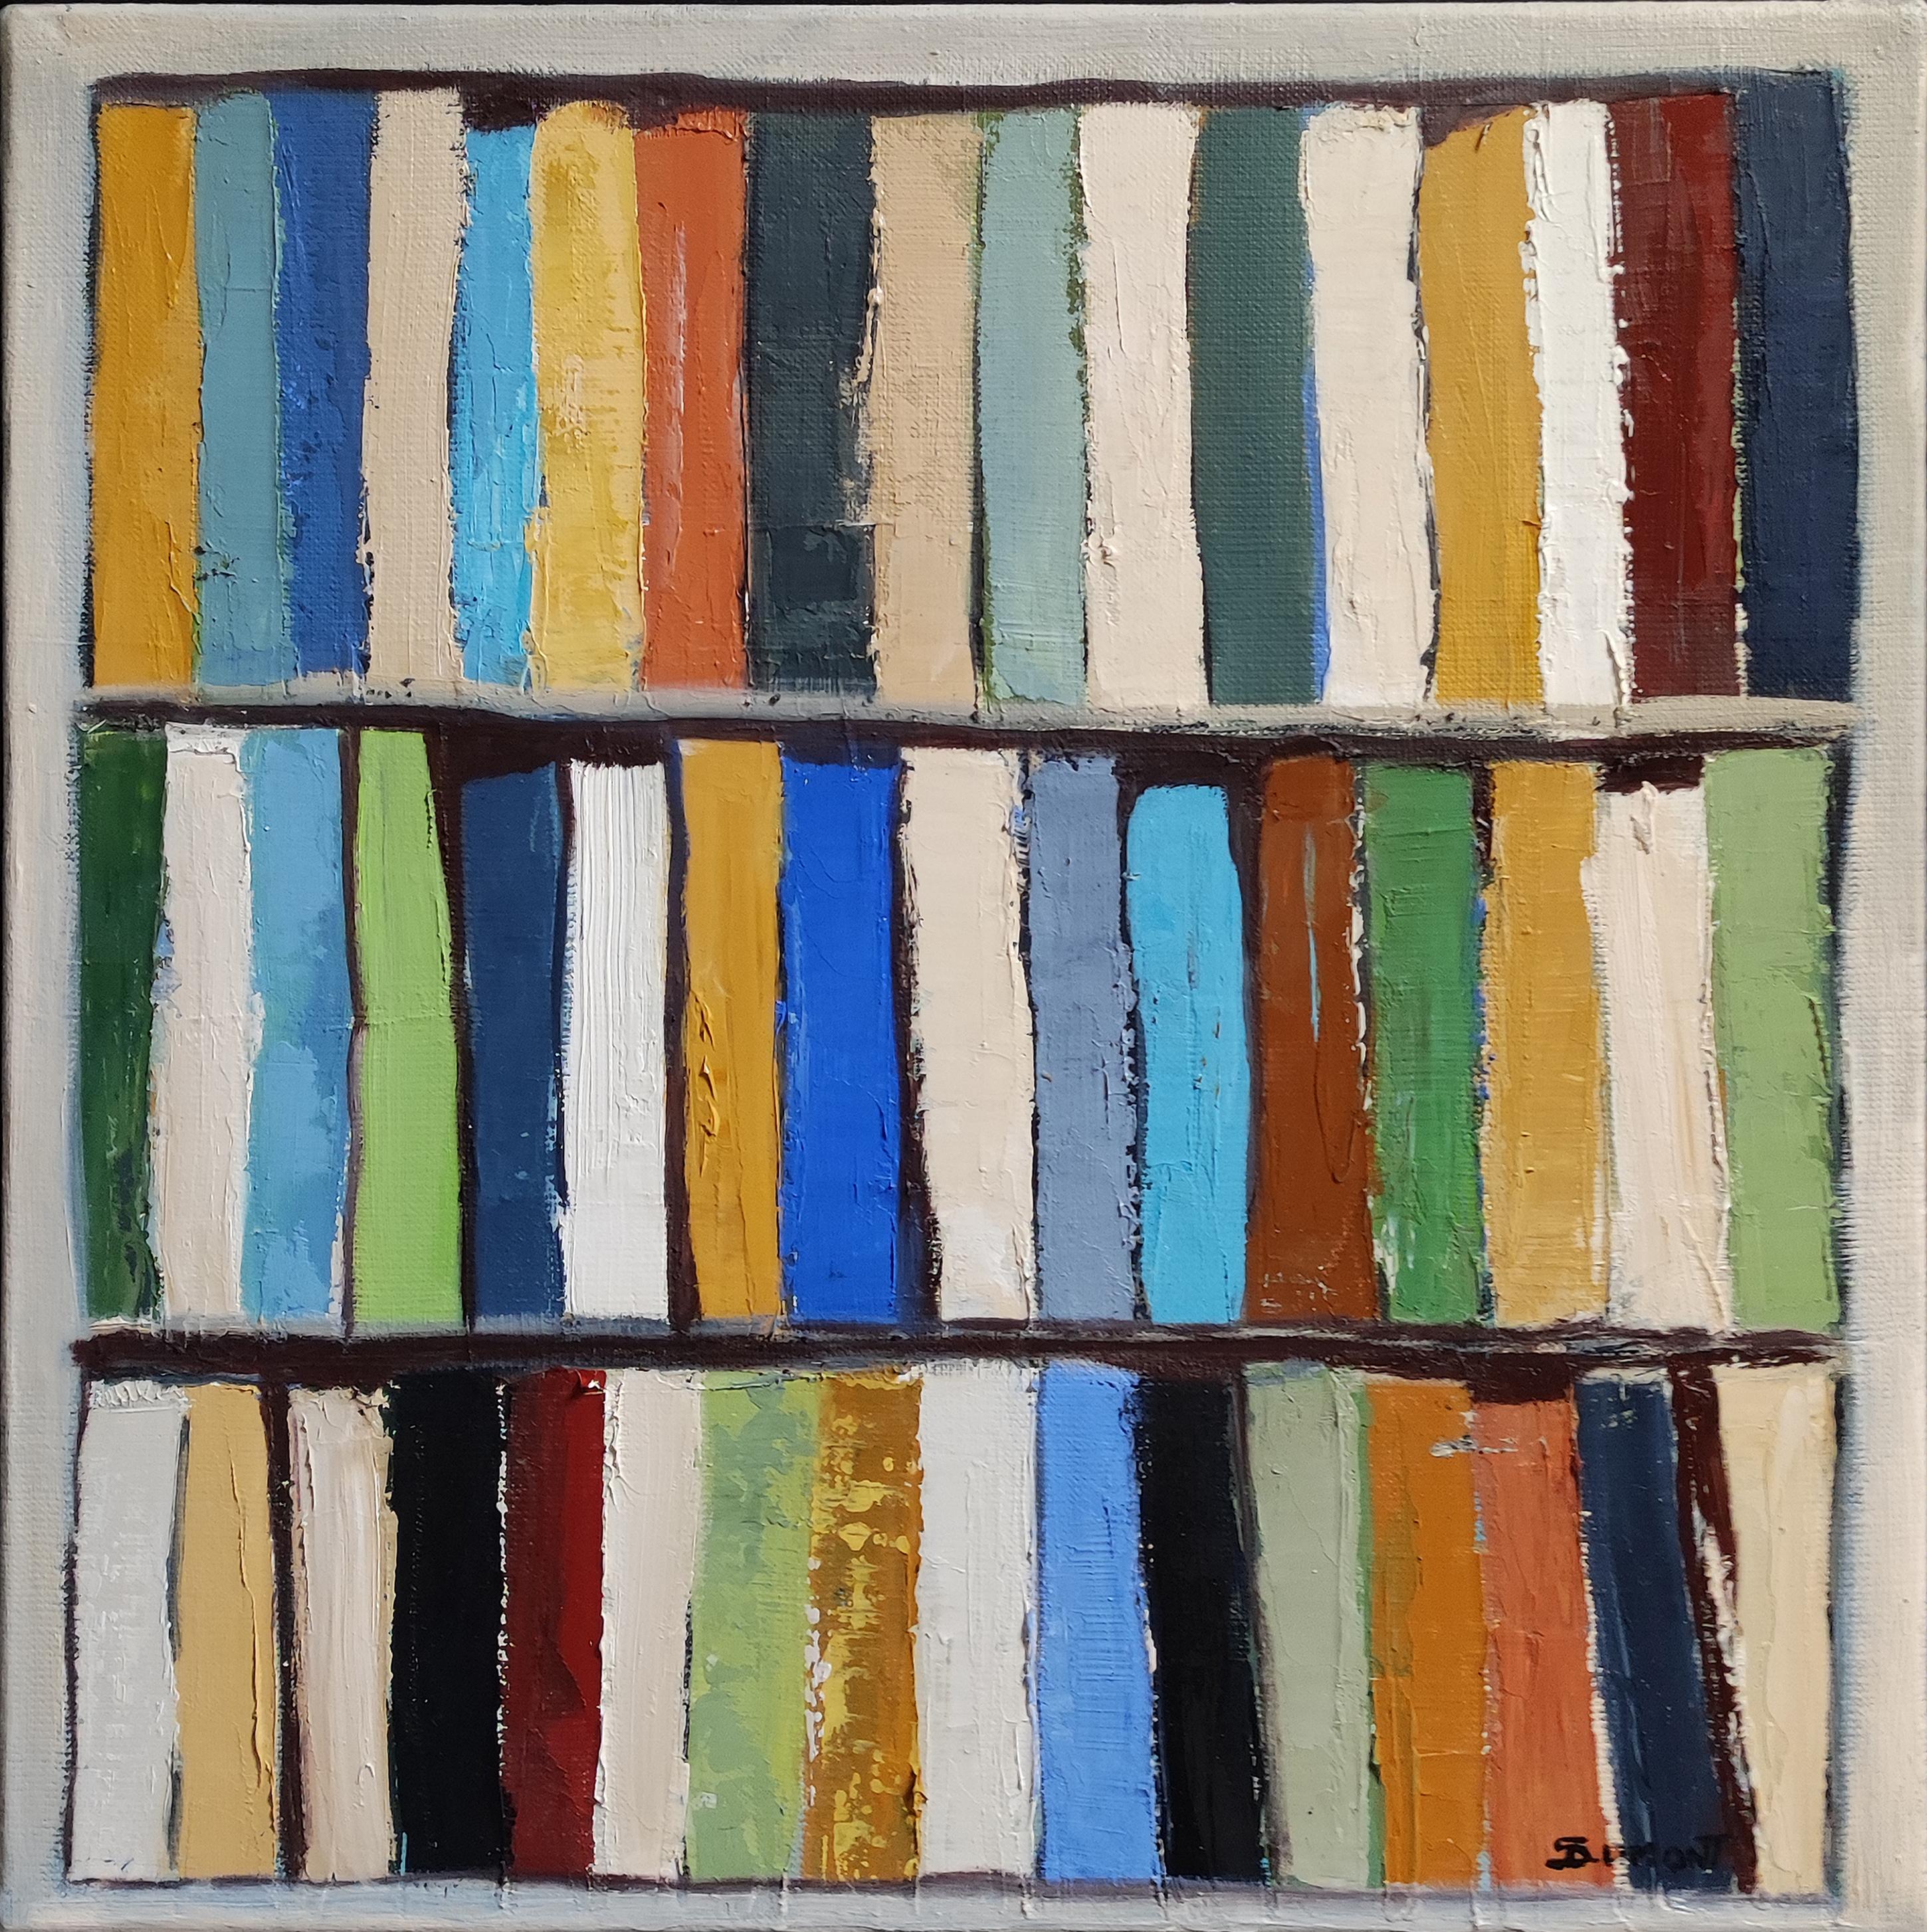 Gamme litteraire, Abstract, Library, French, Minimalism, Modern, Expressionism - Painting by SOPHIE DUMONT